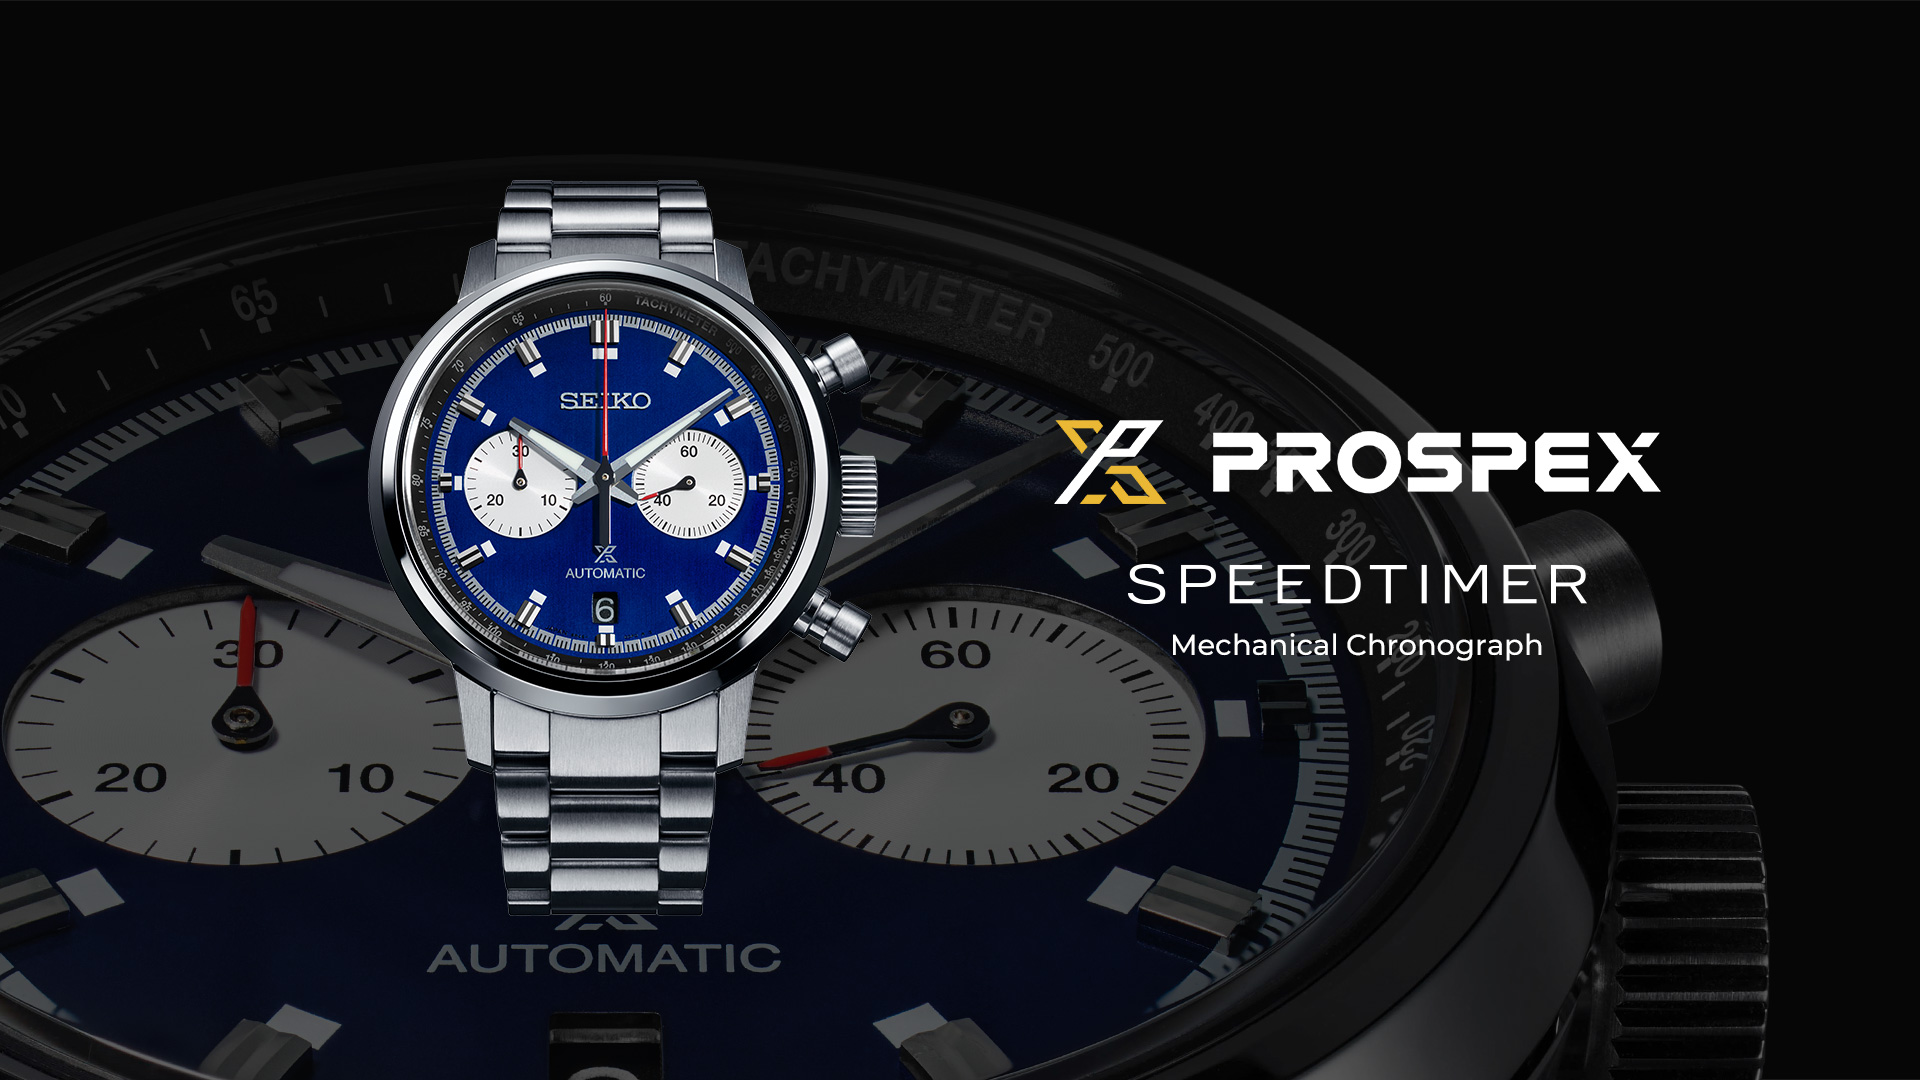 Speedtimer Mechanical Chronograph special page is now available ...